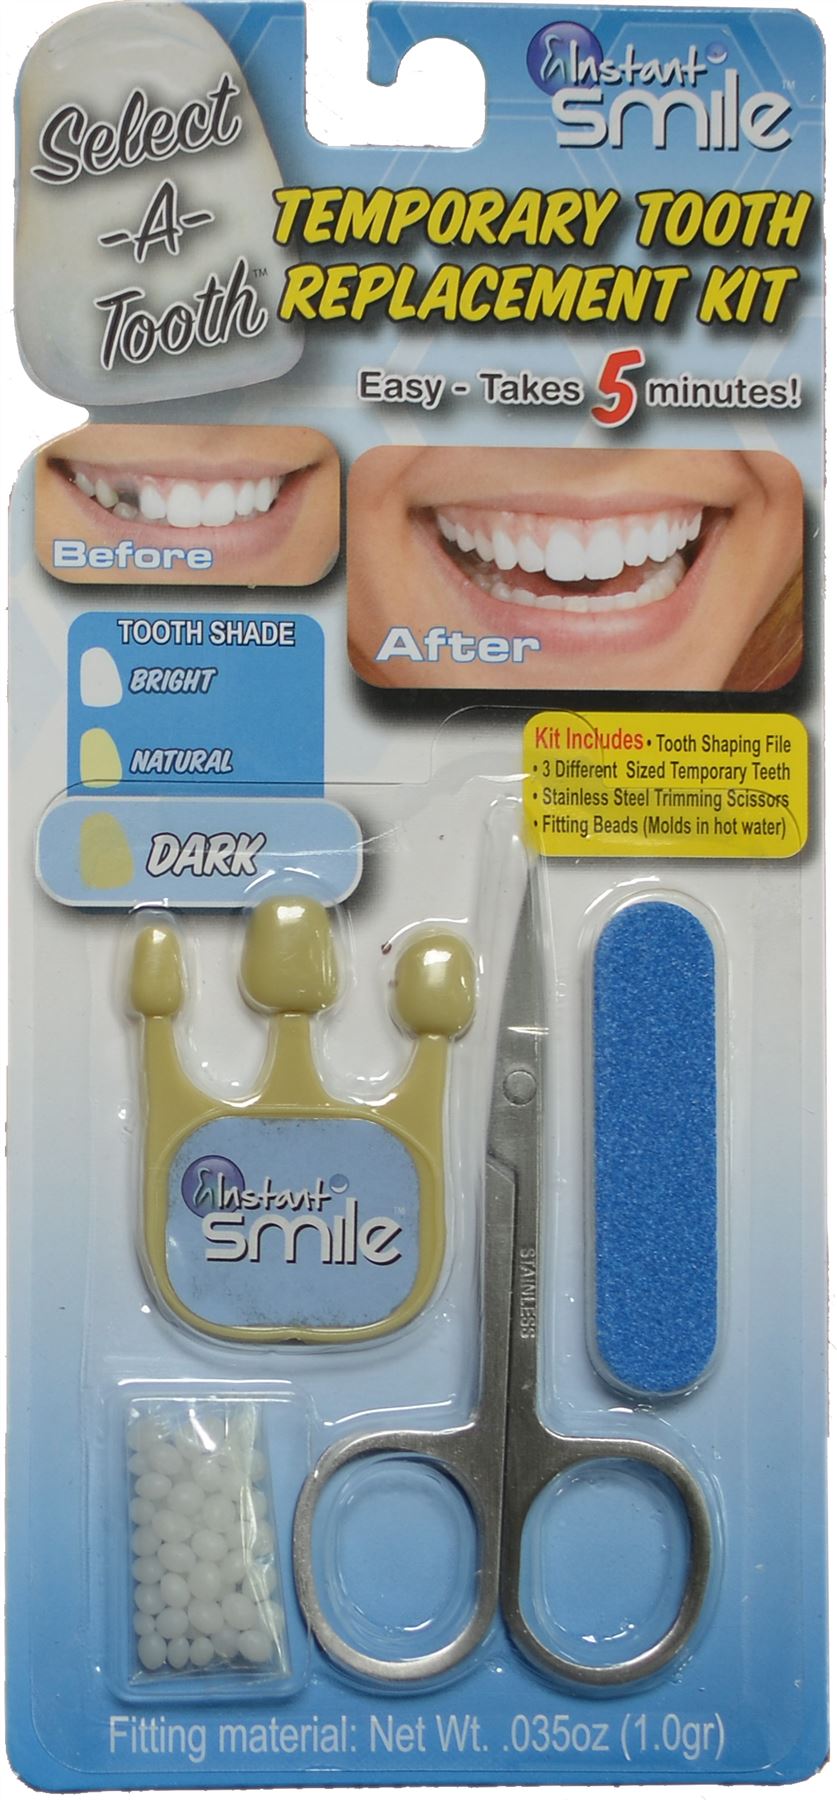 Pro Series - Temporary Tooth Kit - Instant Smile